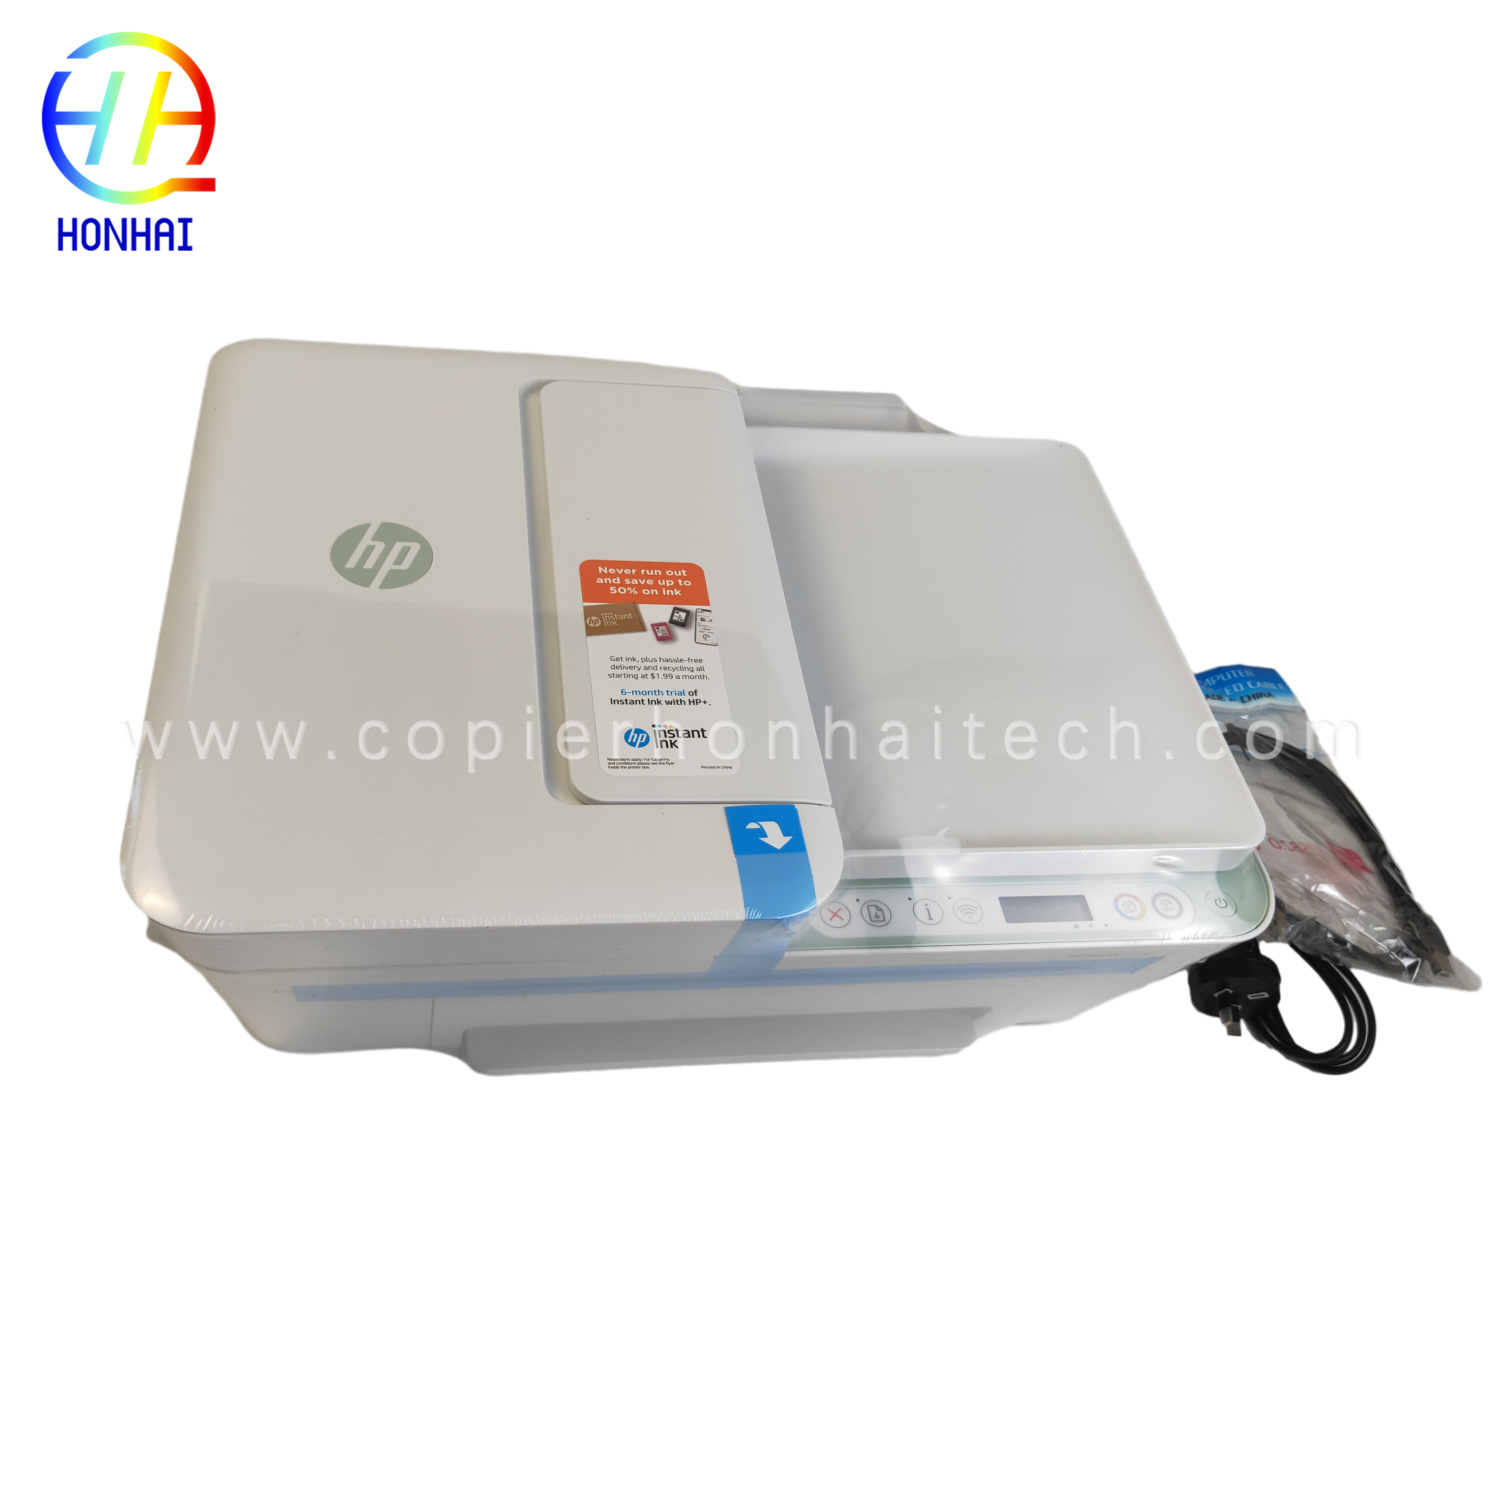 https://www.copierhonhaitech.com/original-new-wireless-printer-for-hp-deskjet-4122e-all-in-one-printer-scan-and-copy-home-office-students-and-home- printer-26q96a-produk/